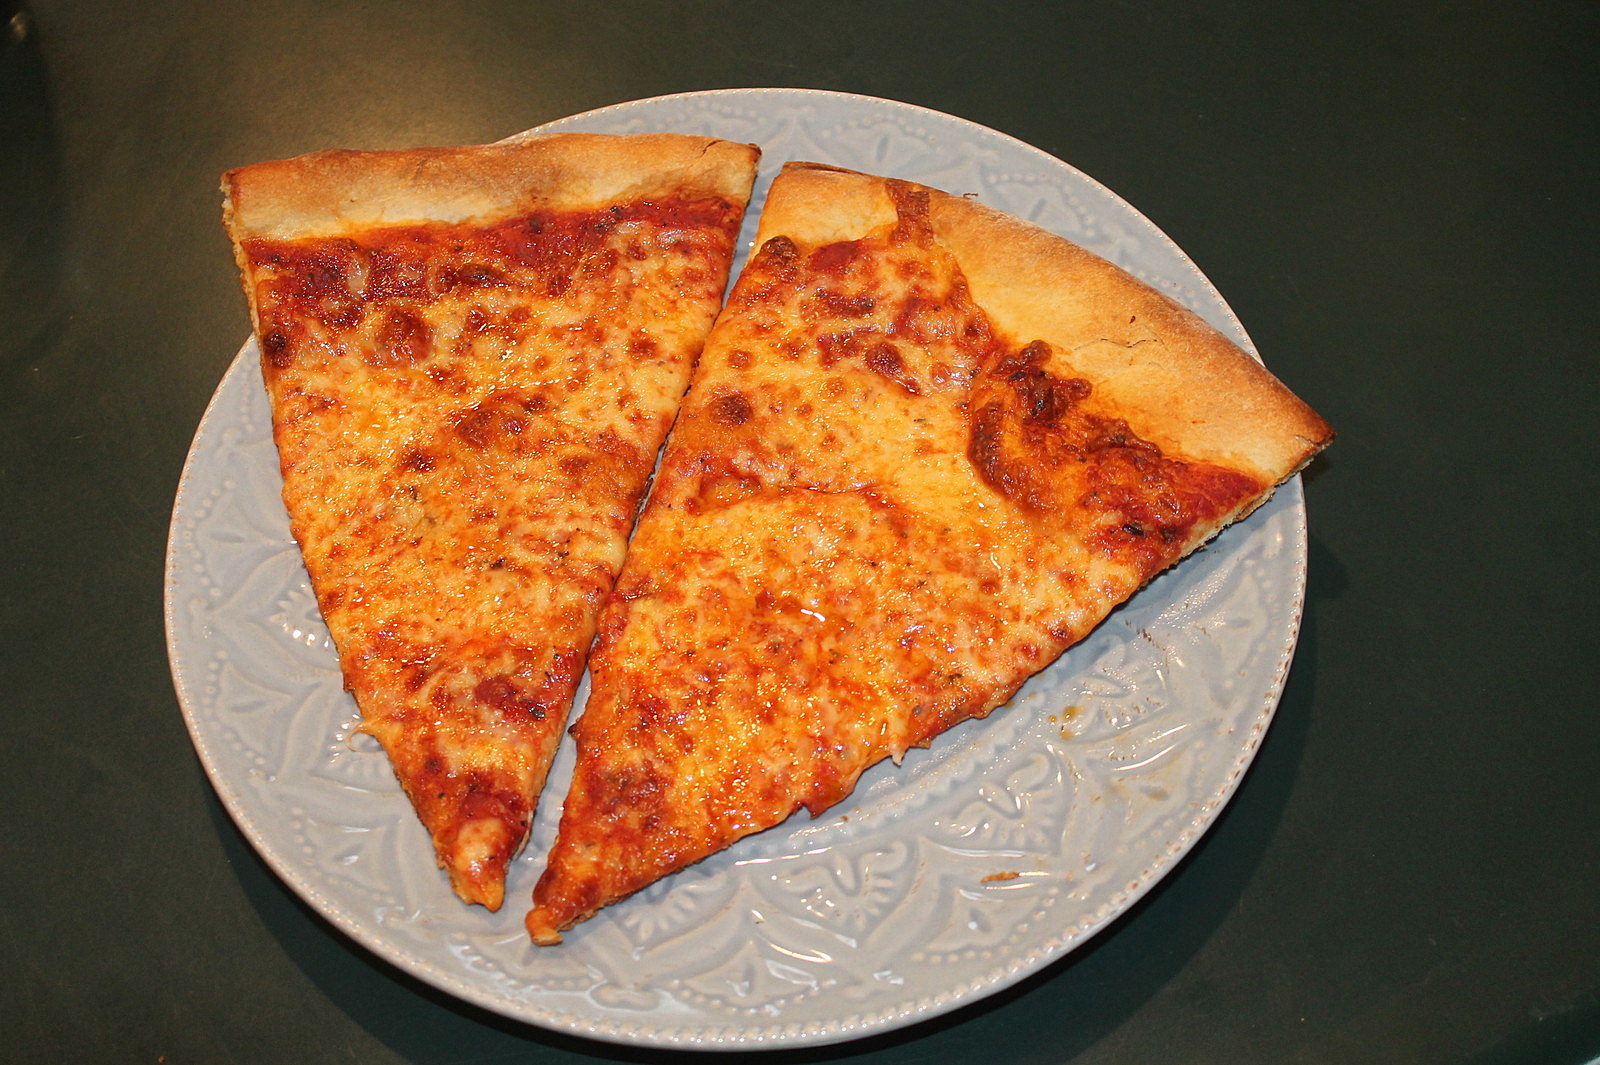 Where is the Best Pizza in New Jersey?